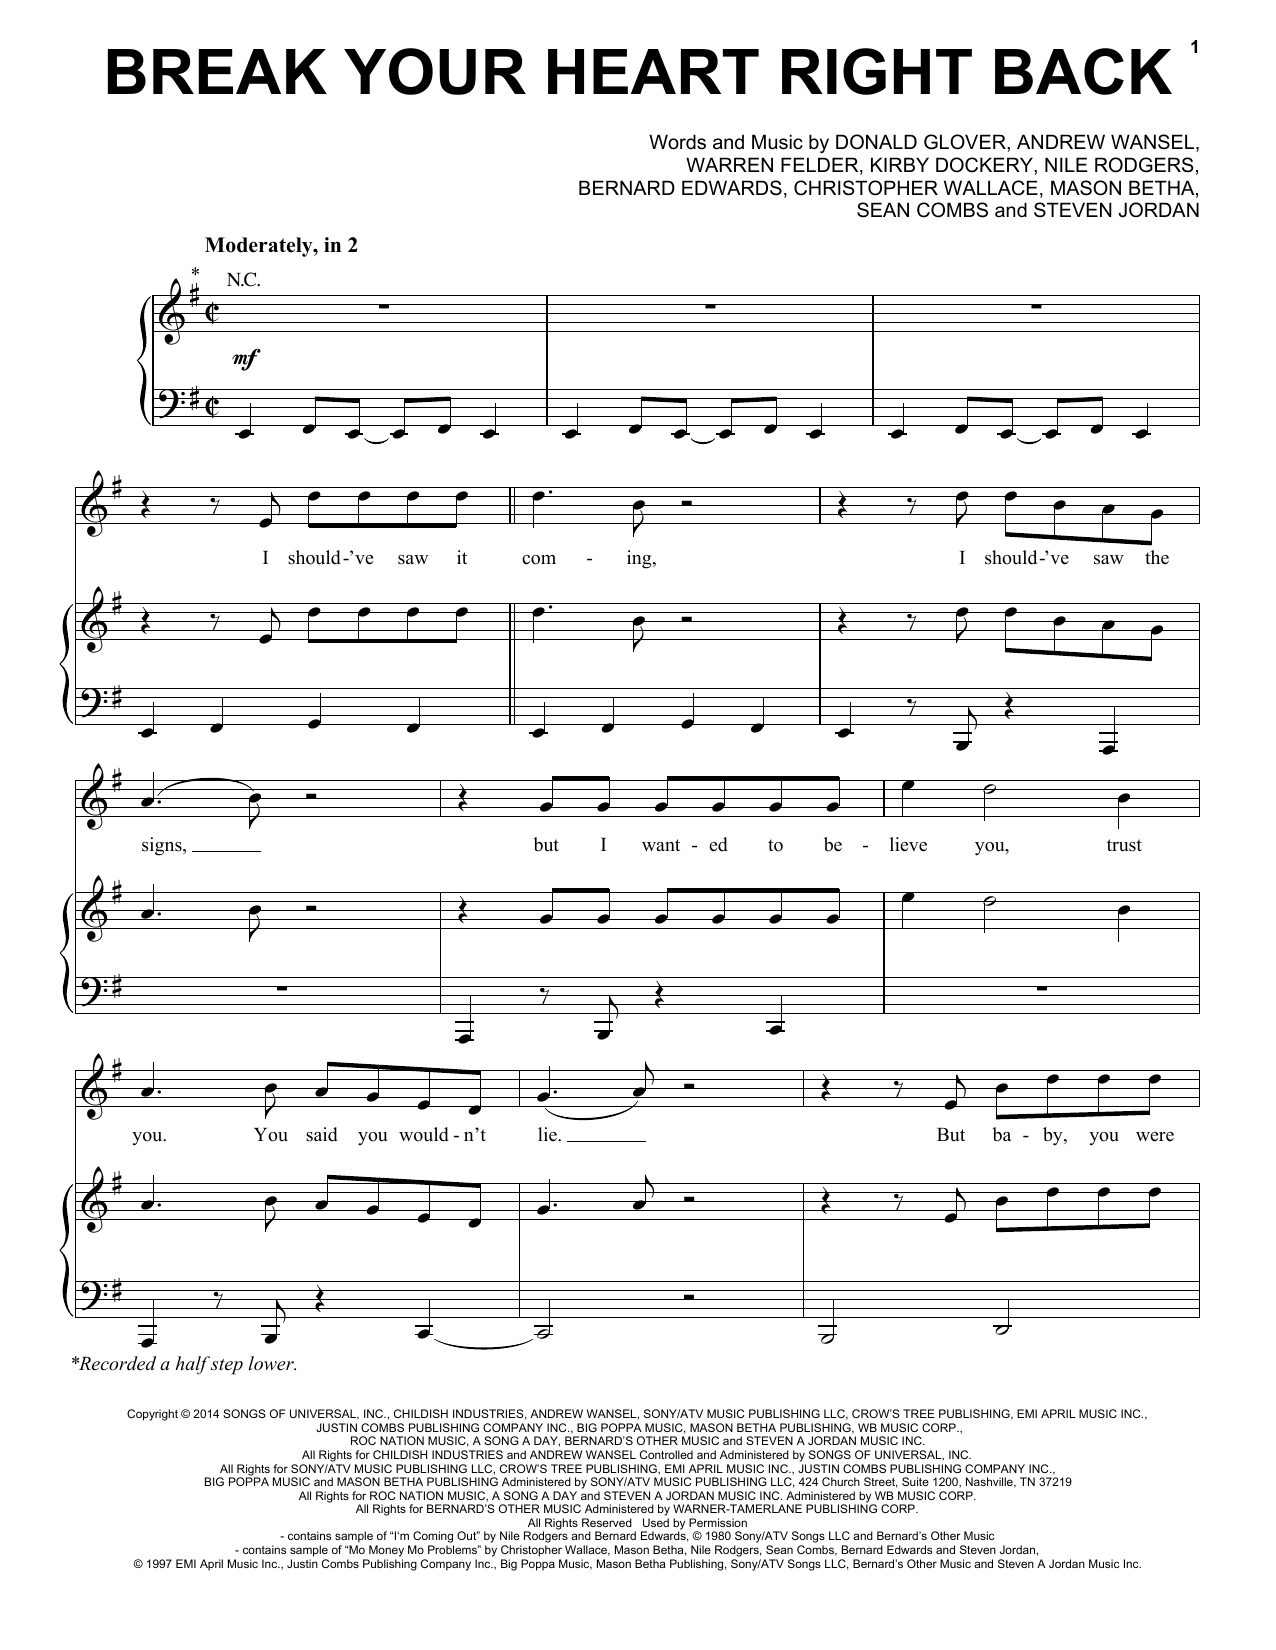 Download Ariana Grande Break Your Heart Right Back Sheet Music